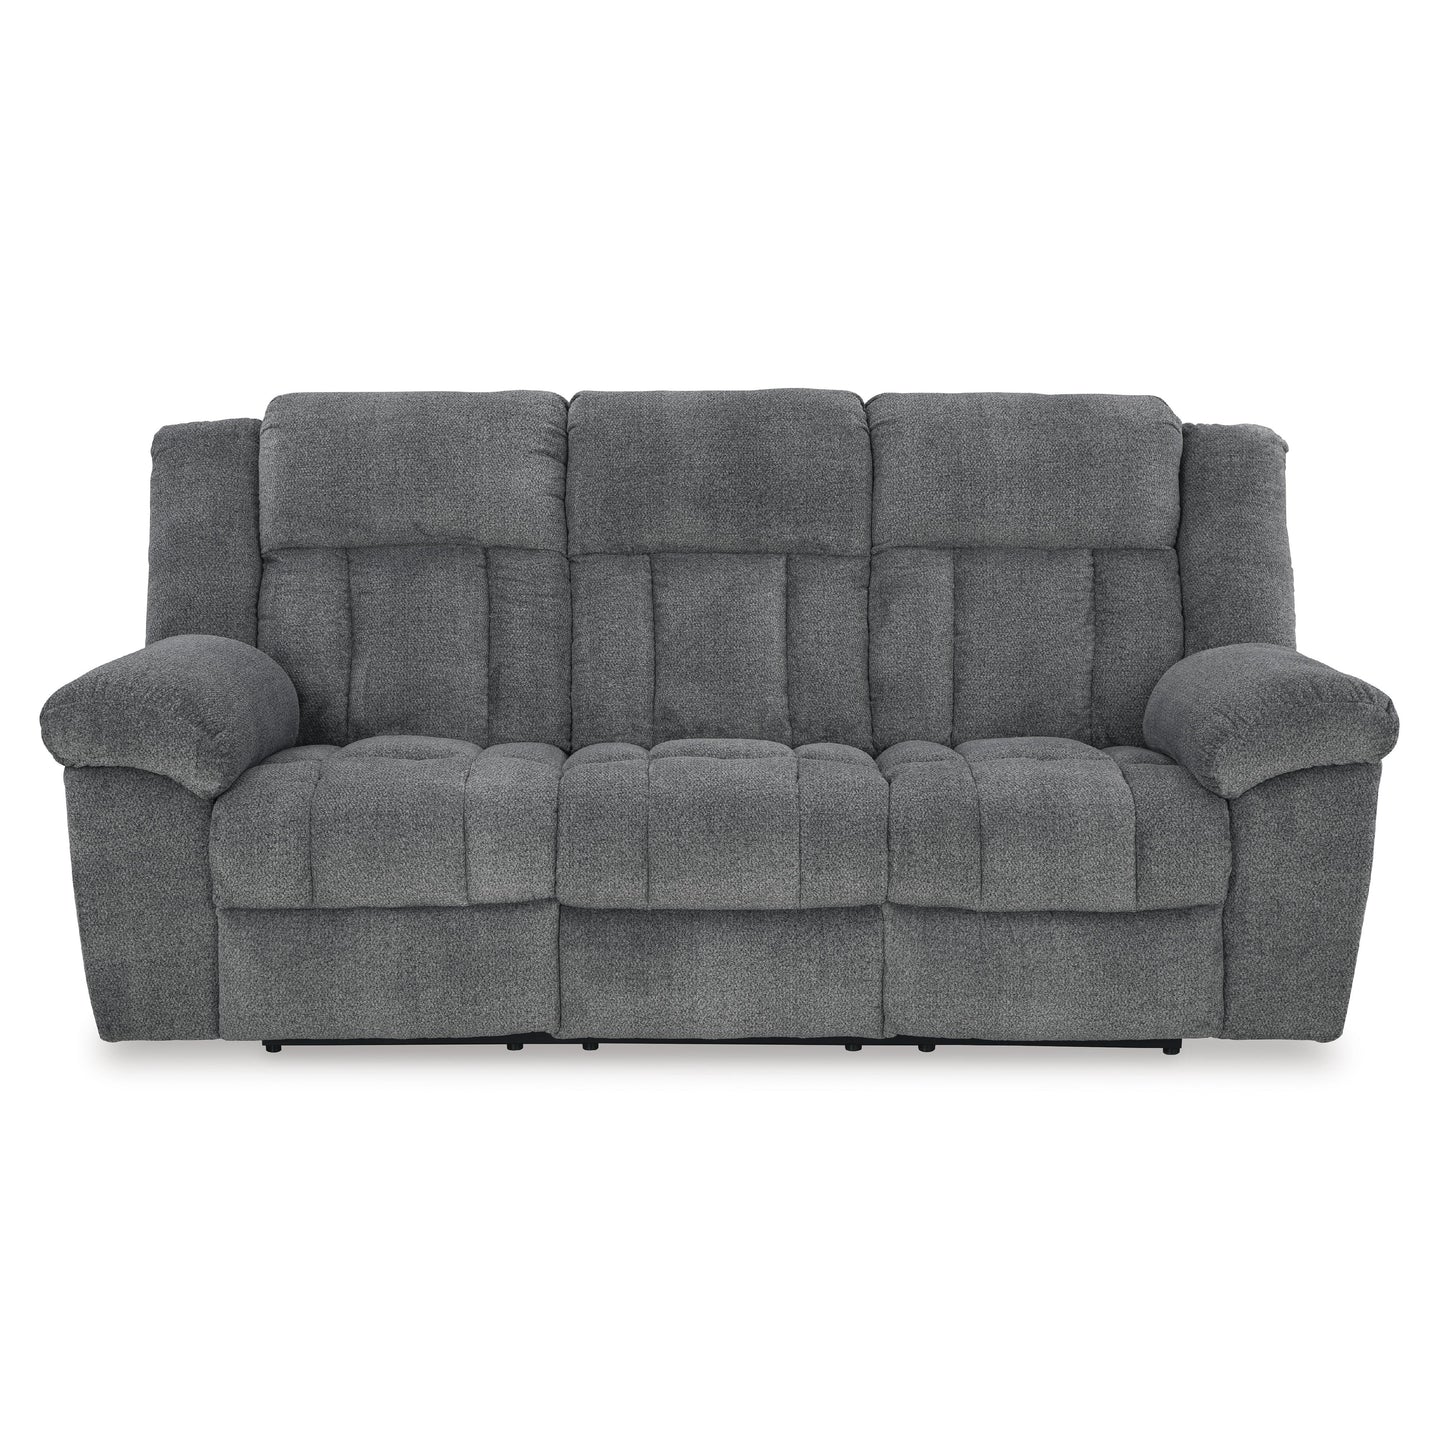 Signature Design by Ashley Tip-Off Power Reclining Sofa 6930415 IMAGE 3